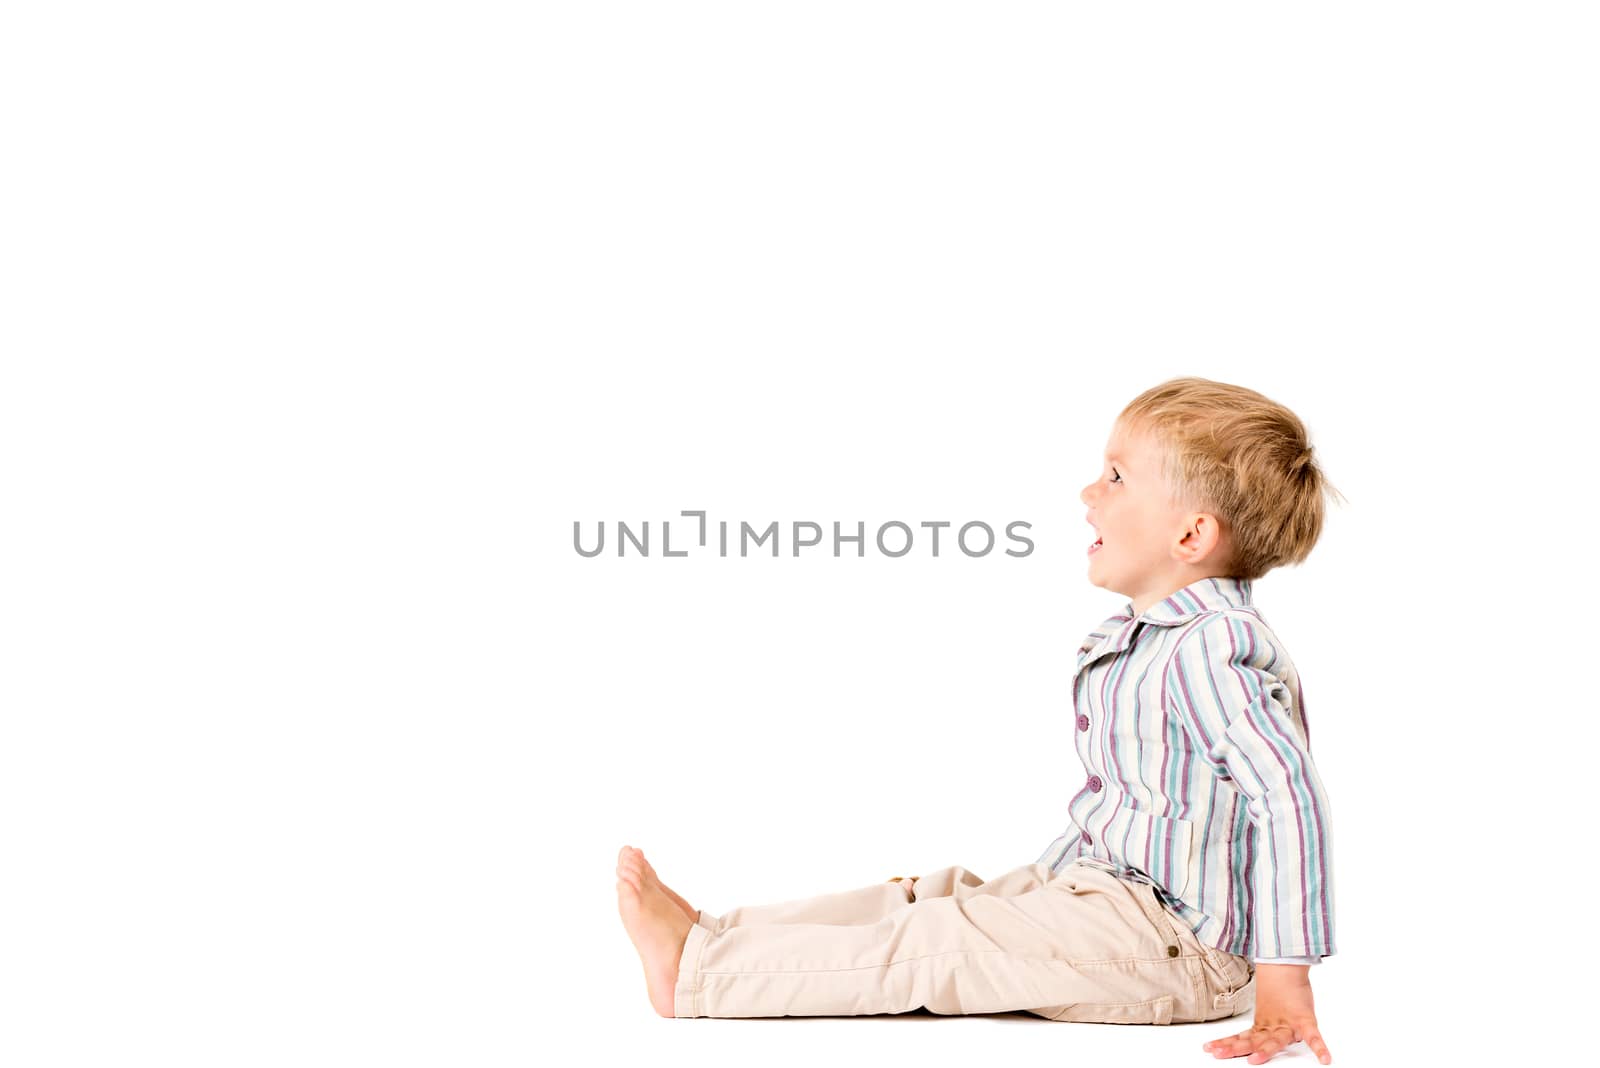 Boy in shirt shot in the studio on a white background